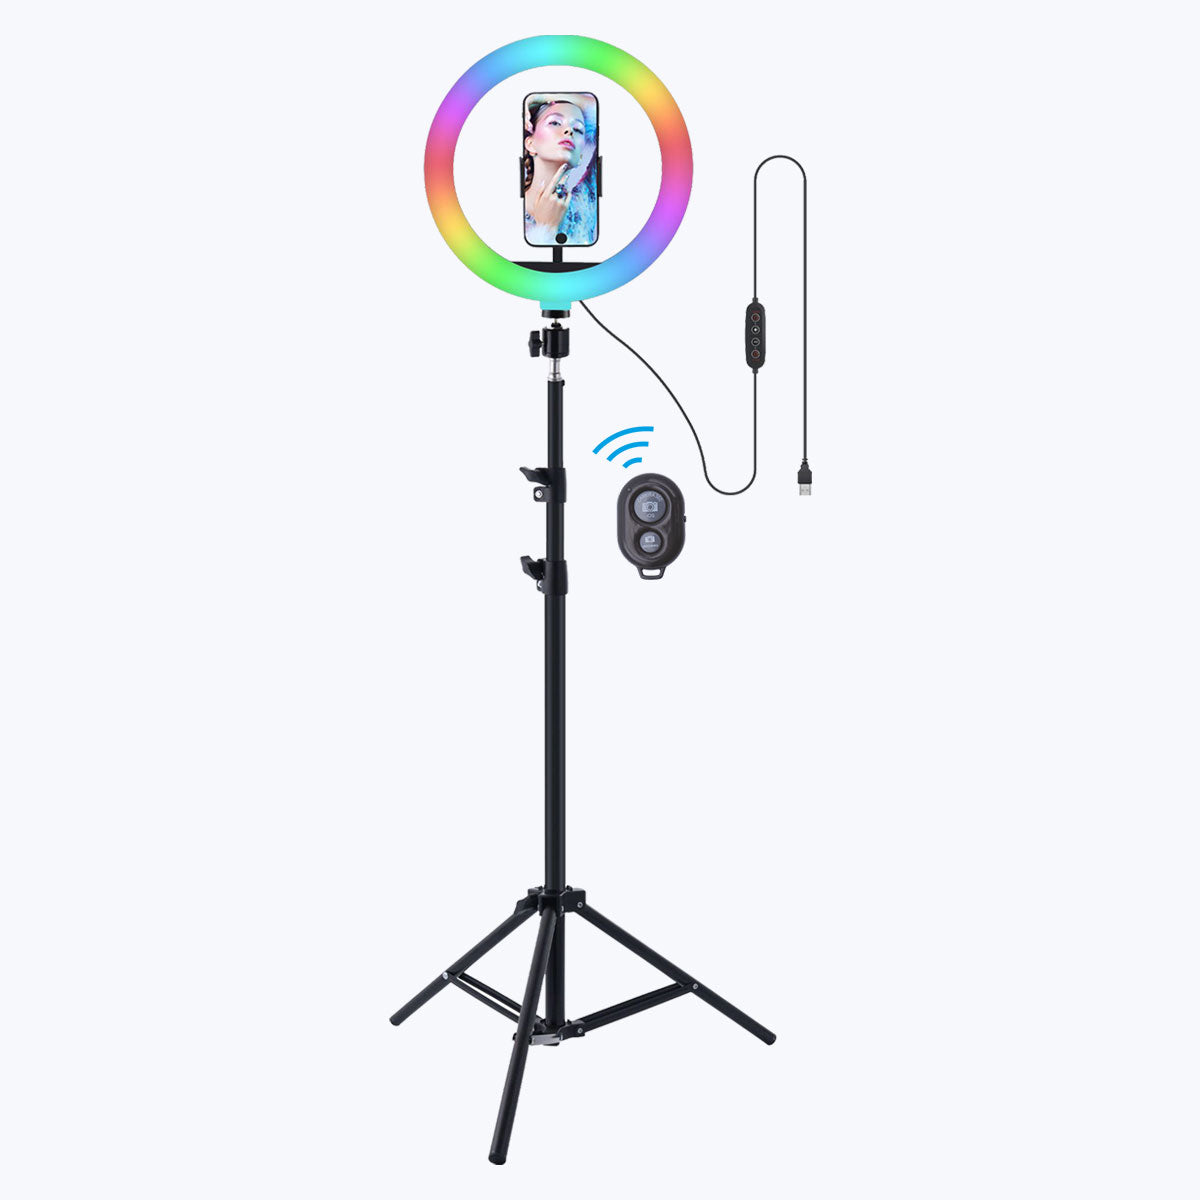 Ring Light - 10 inch Led Selfie Ring Light with Stand, Big Led Camera Light  with Cool Warm Mix Light, Led Circle Light for YouTube Video Live Stream  Makeup, (Multicolour) : Amazon.in: Electronics